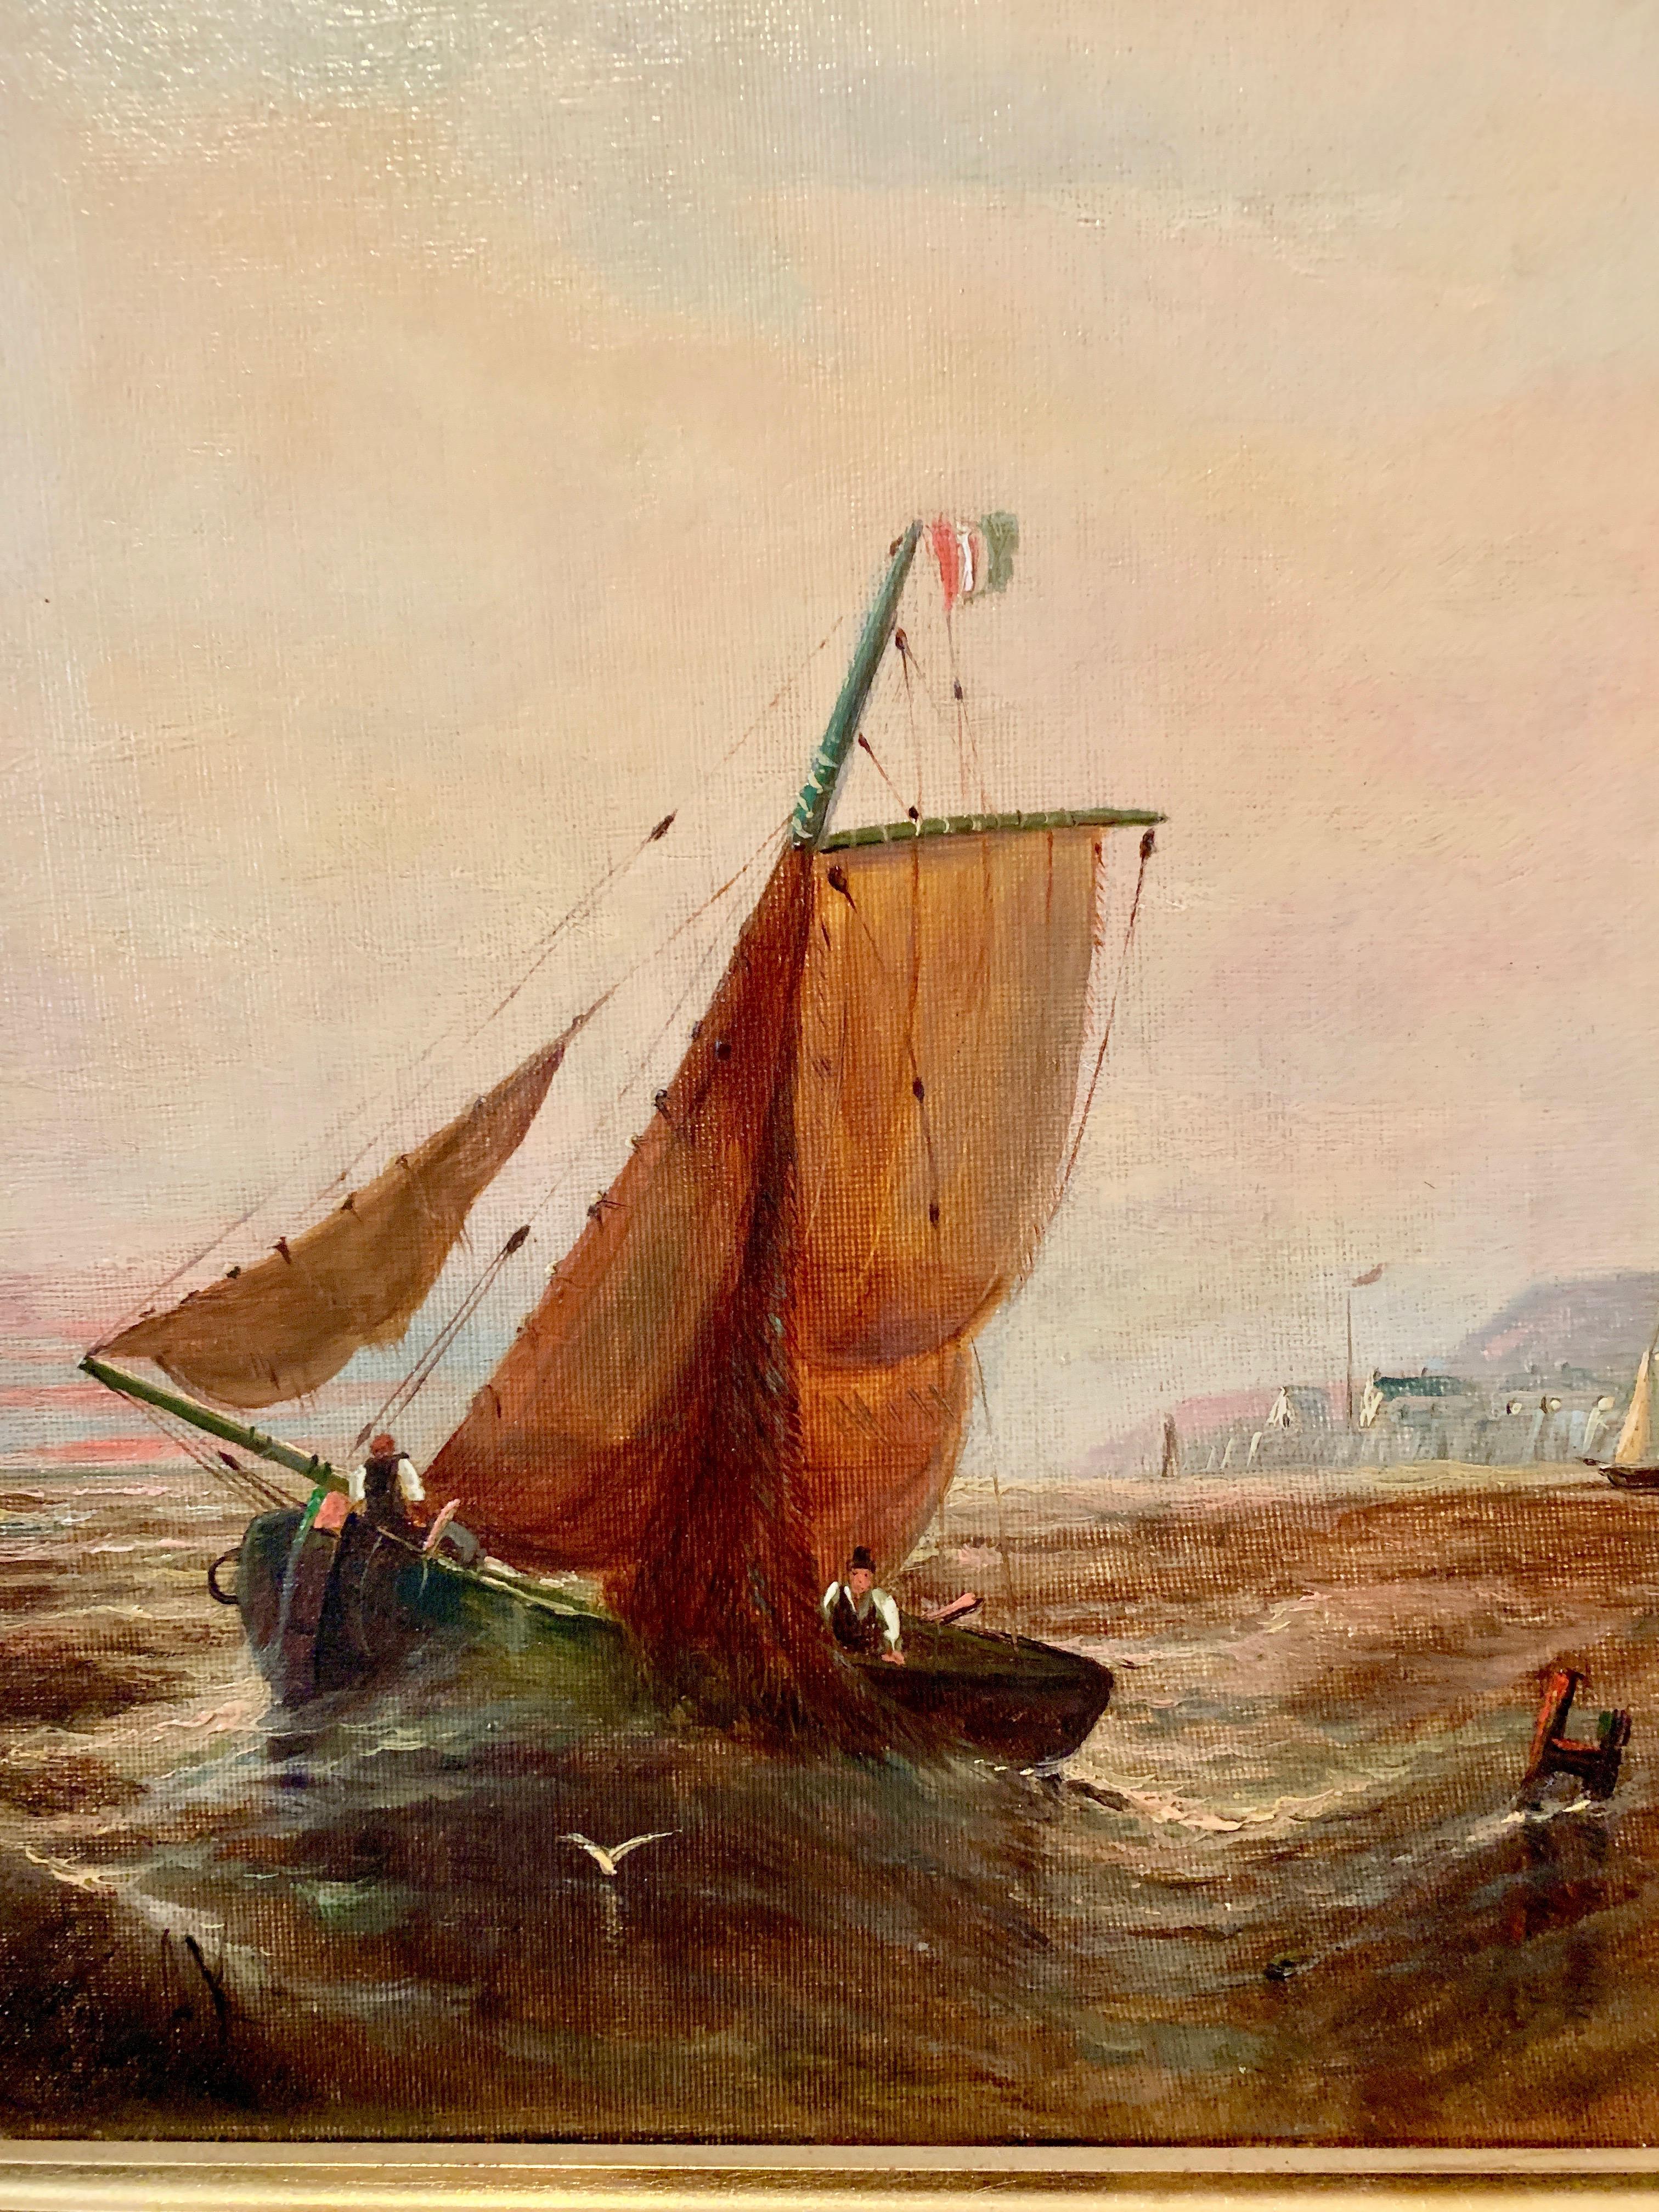 English Victorian 19th century fishing boat in the English Channel - Painting by William Adolphus Knell